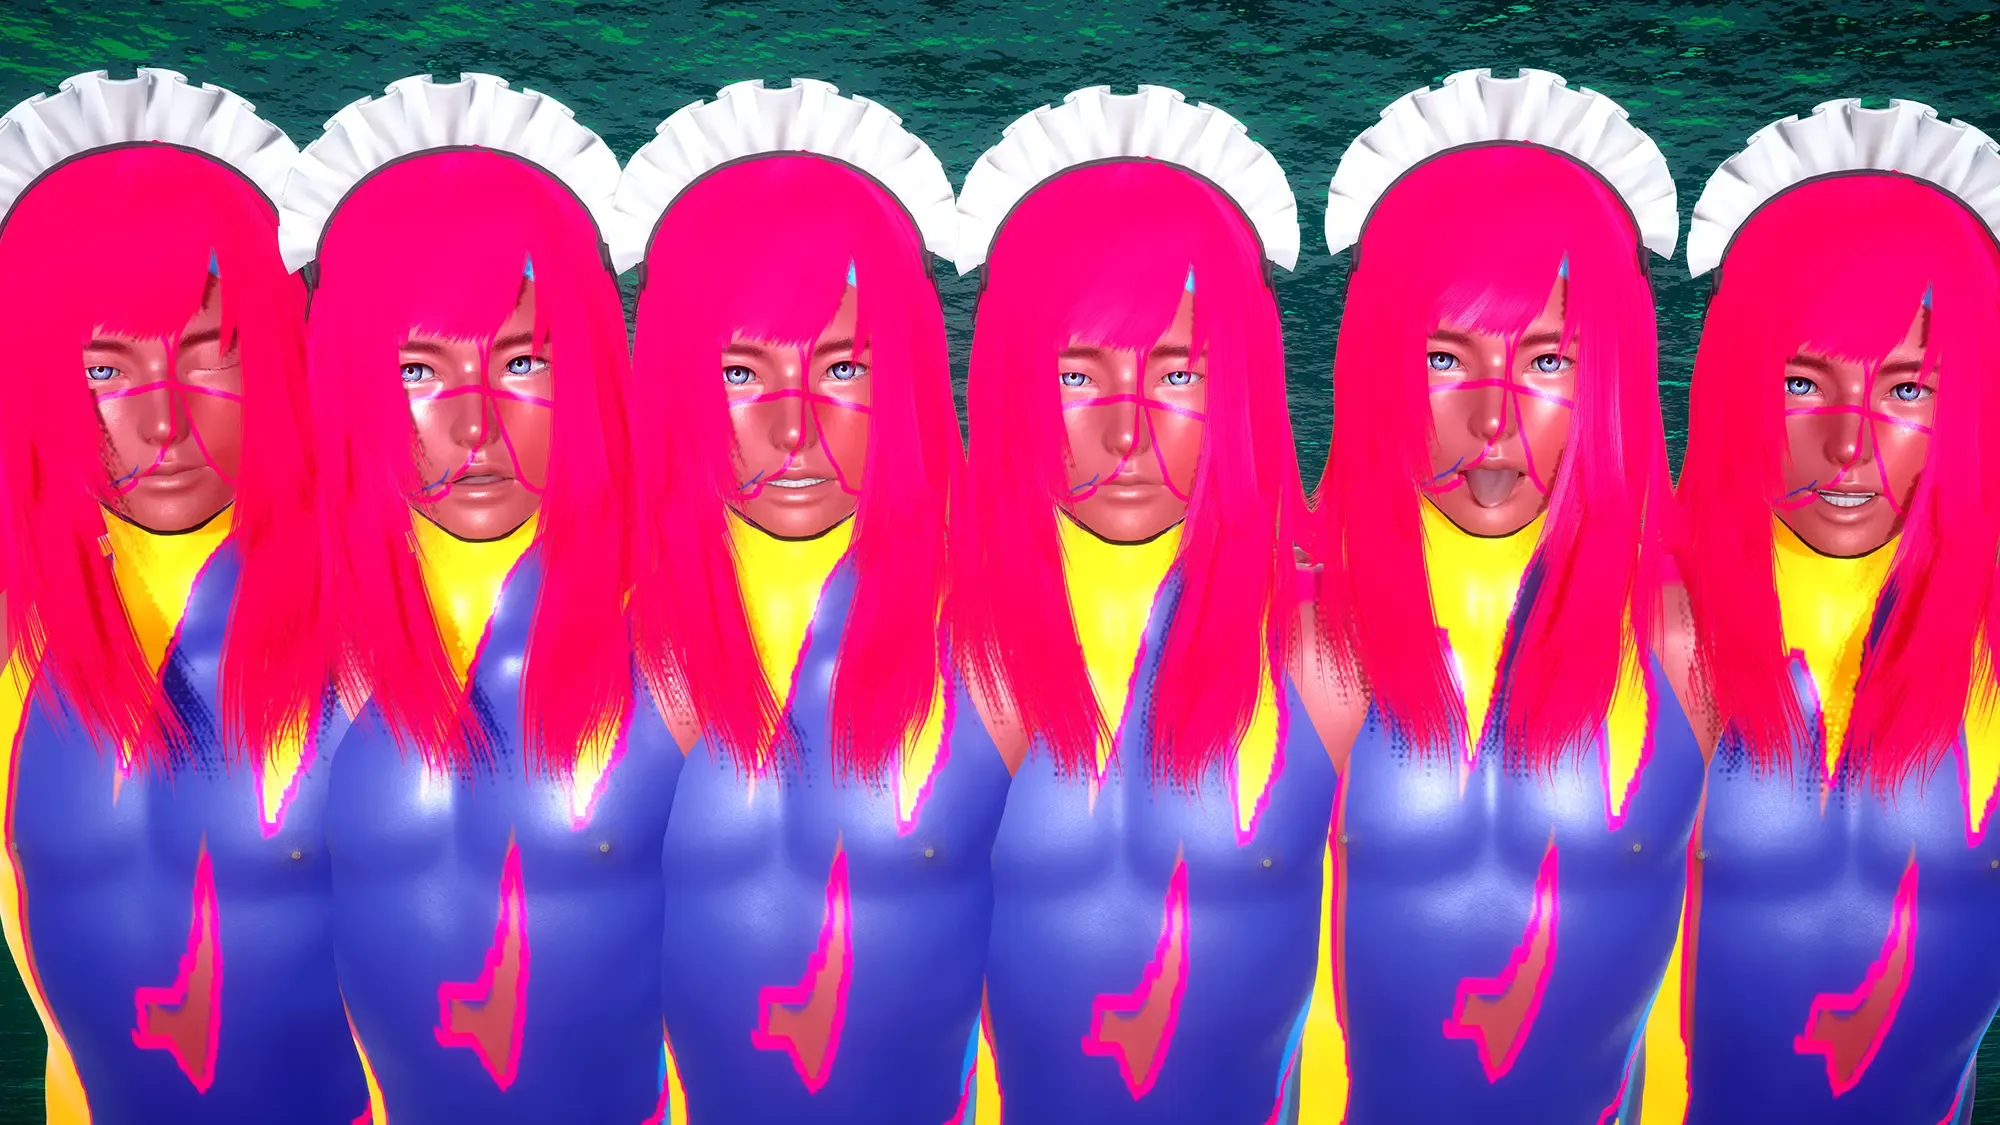 wolfgang saker artwork, vibrant surreal digital artwork heavenly peach banquet 2022 by heavenly peach banquet featuring neon pink-haired figures in bright maid costumes dye sublimated on aluminum 33.1 x 59.1 inches exploring themes of identity and individuality against a textured green background